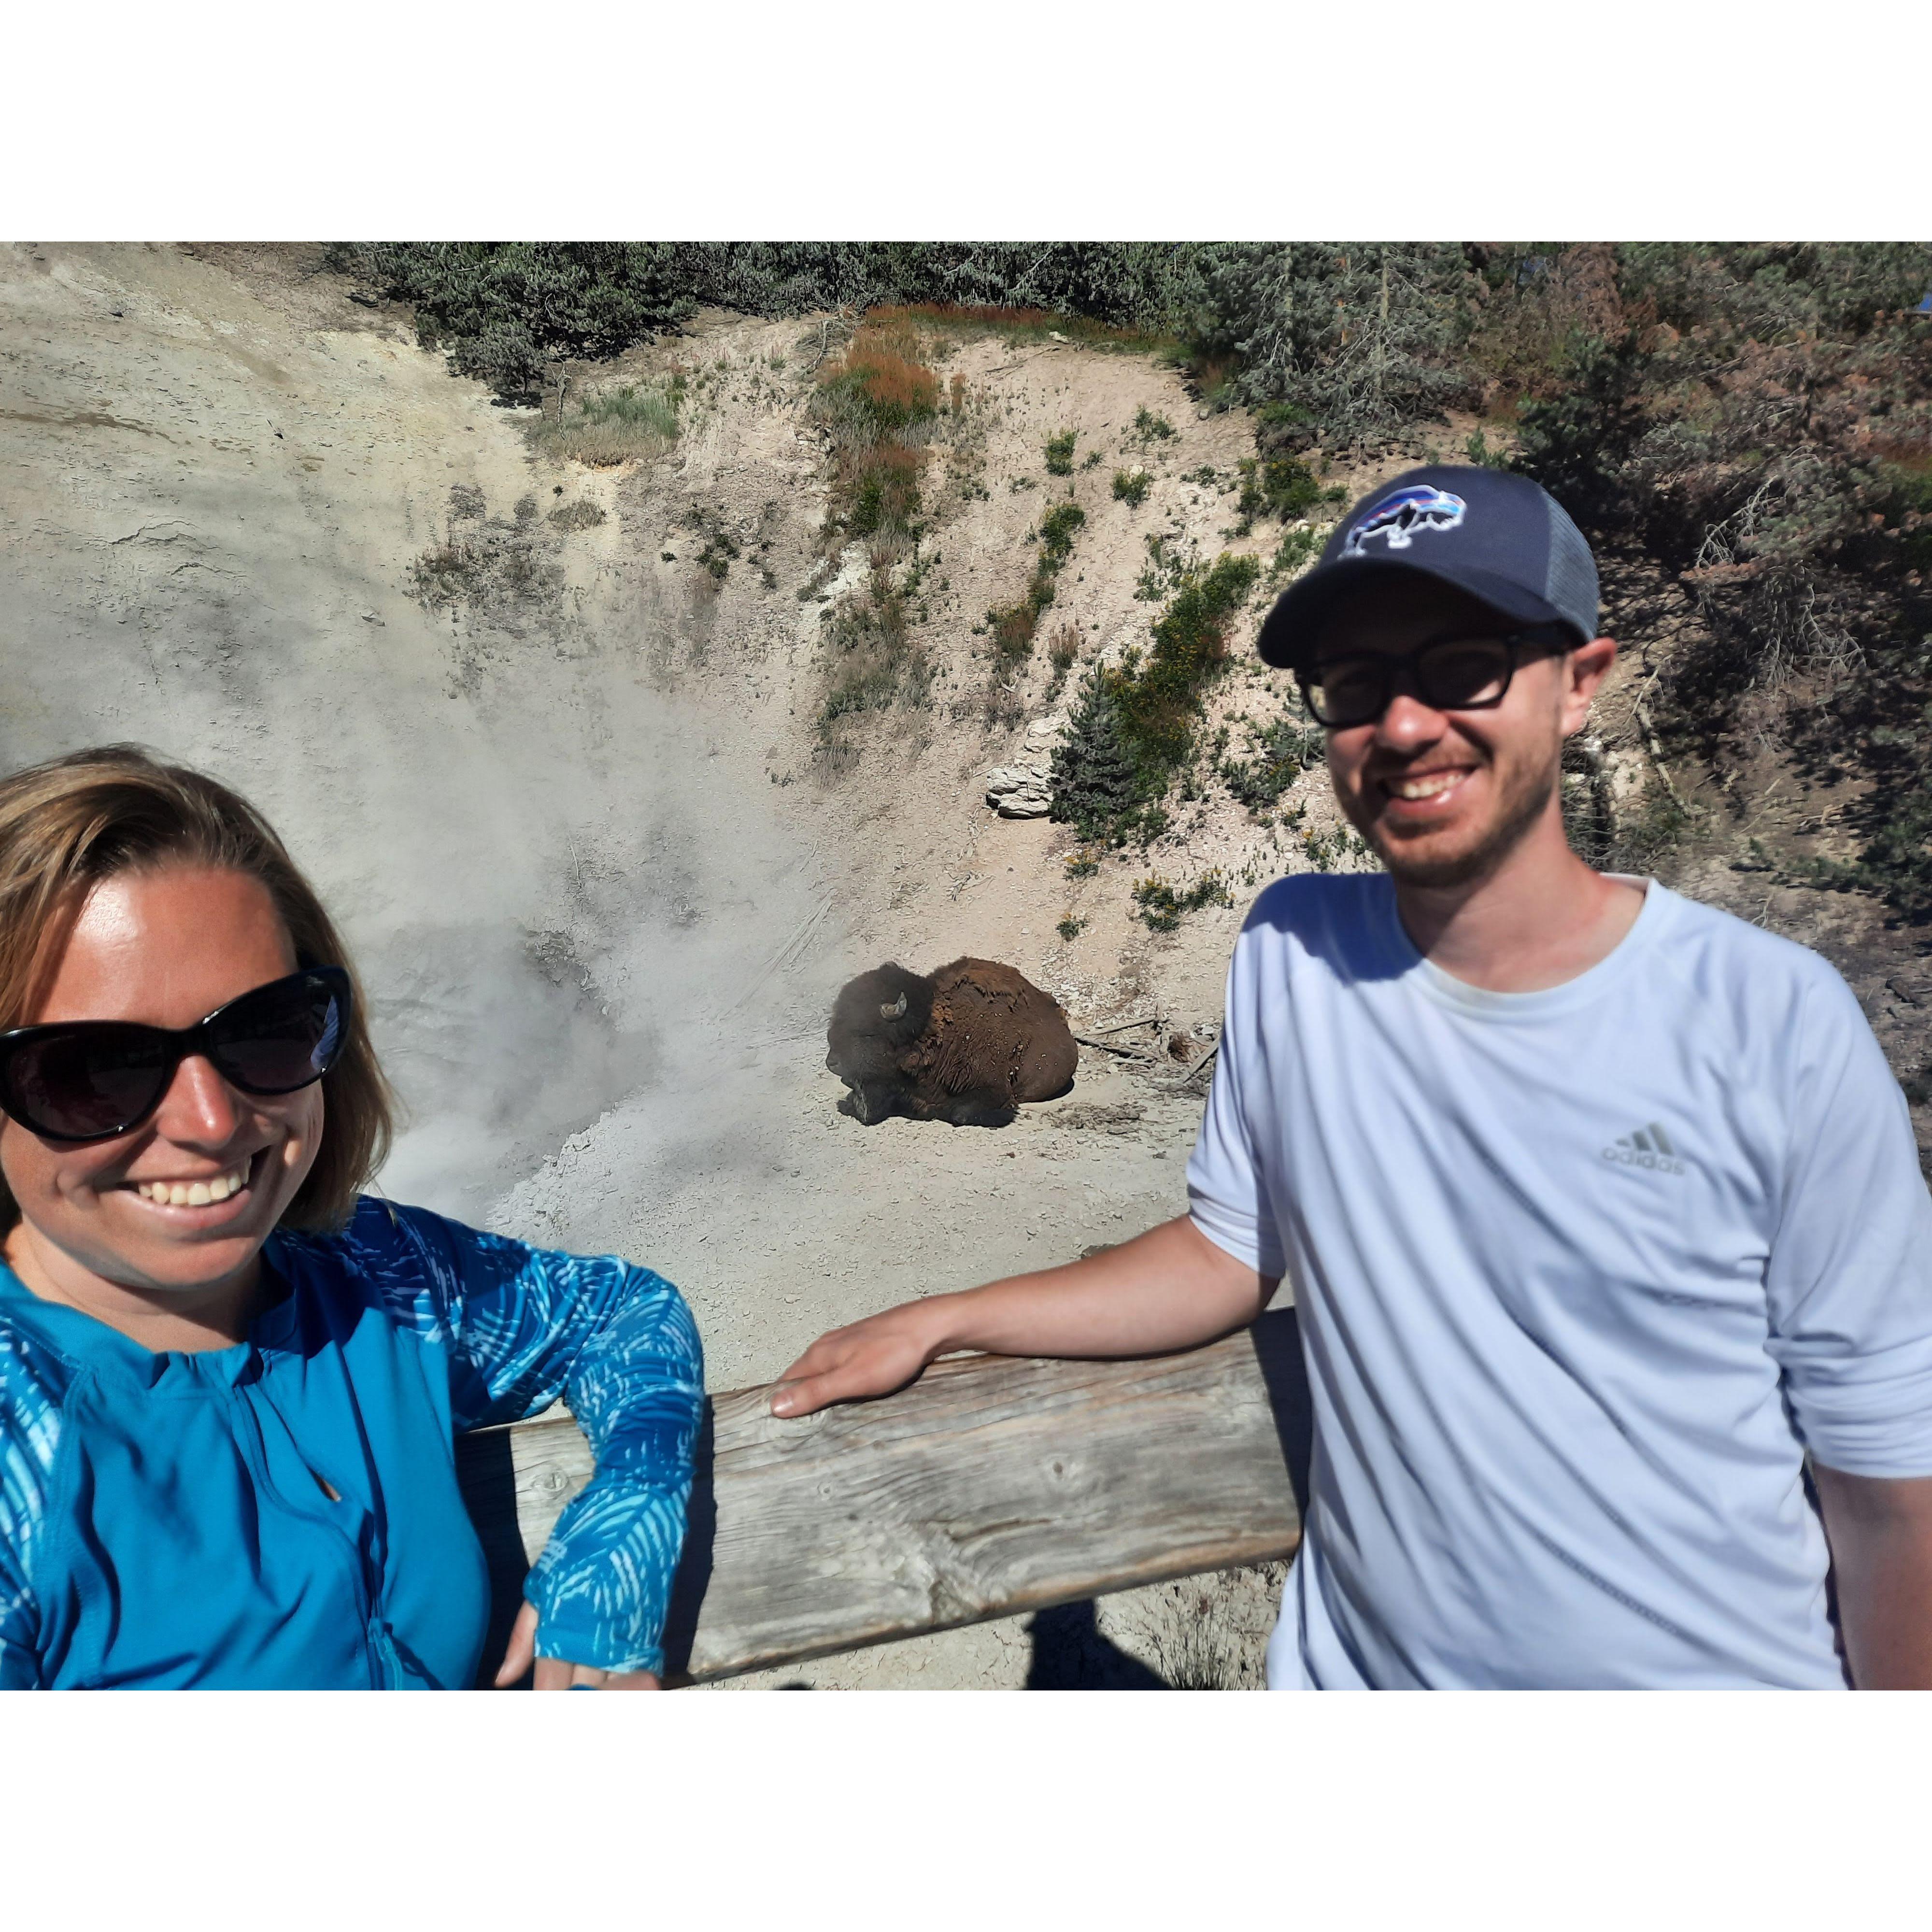 Us at Yellowstone, with a buffalo we befriended at the Mud Volcano!